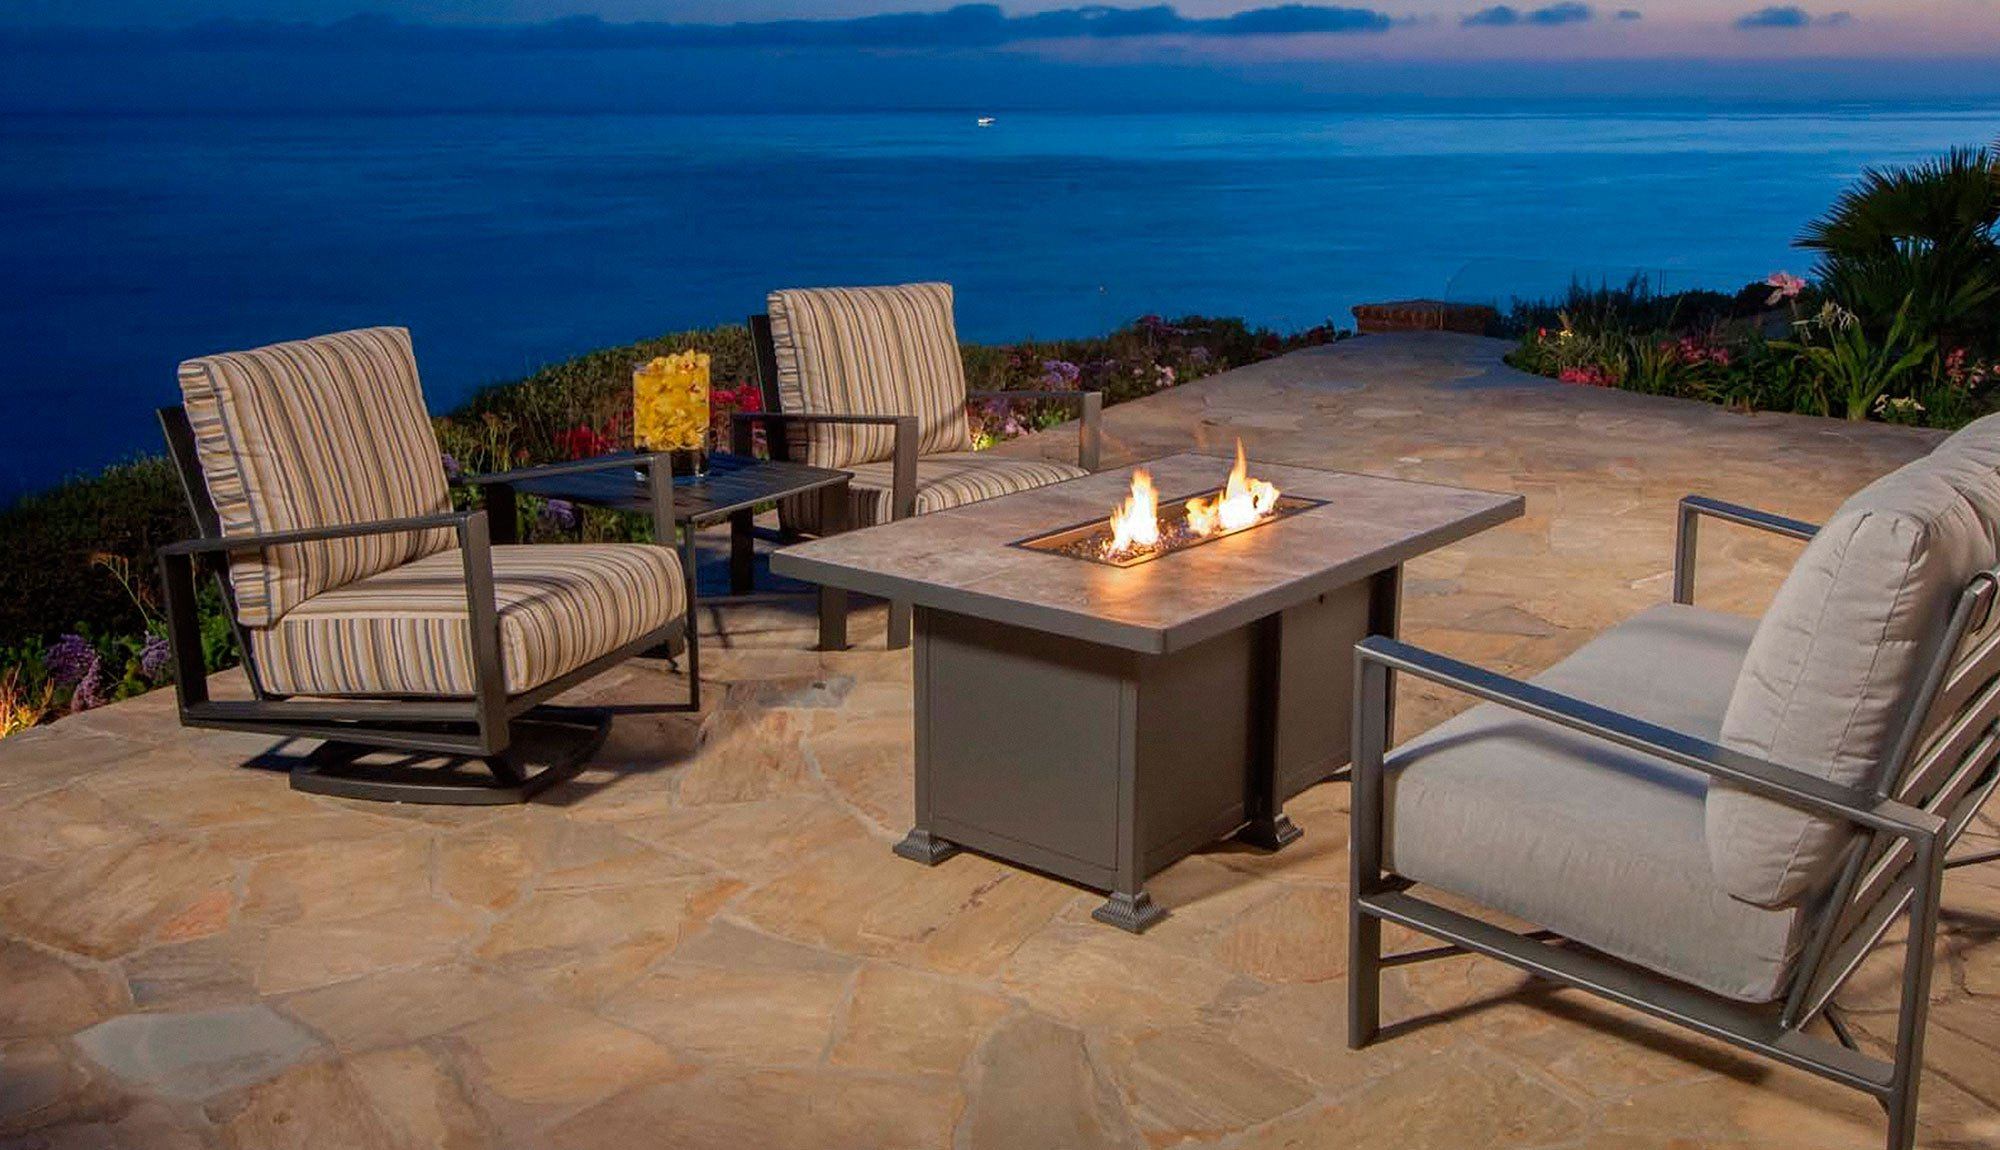 SEE ALL PATIO FURNITURE